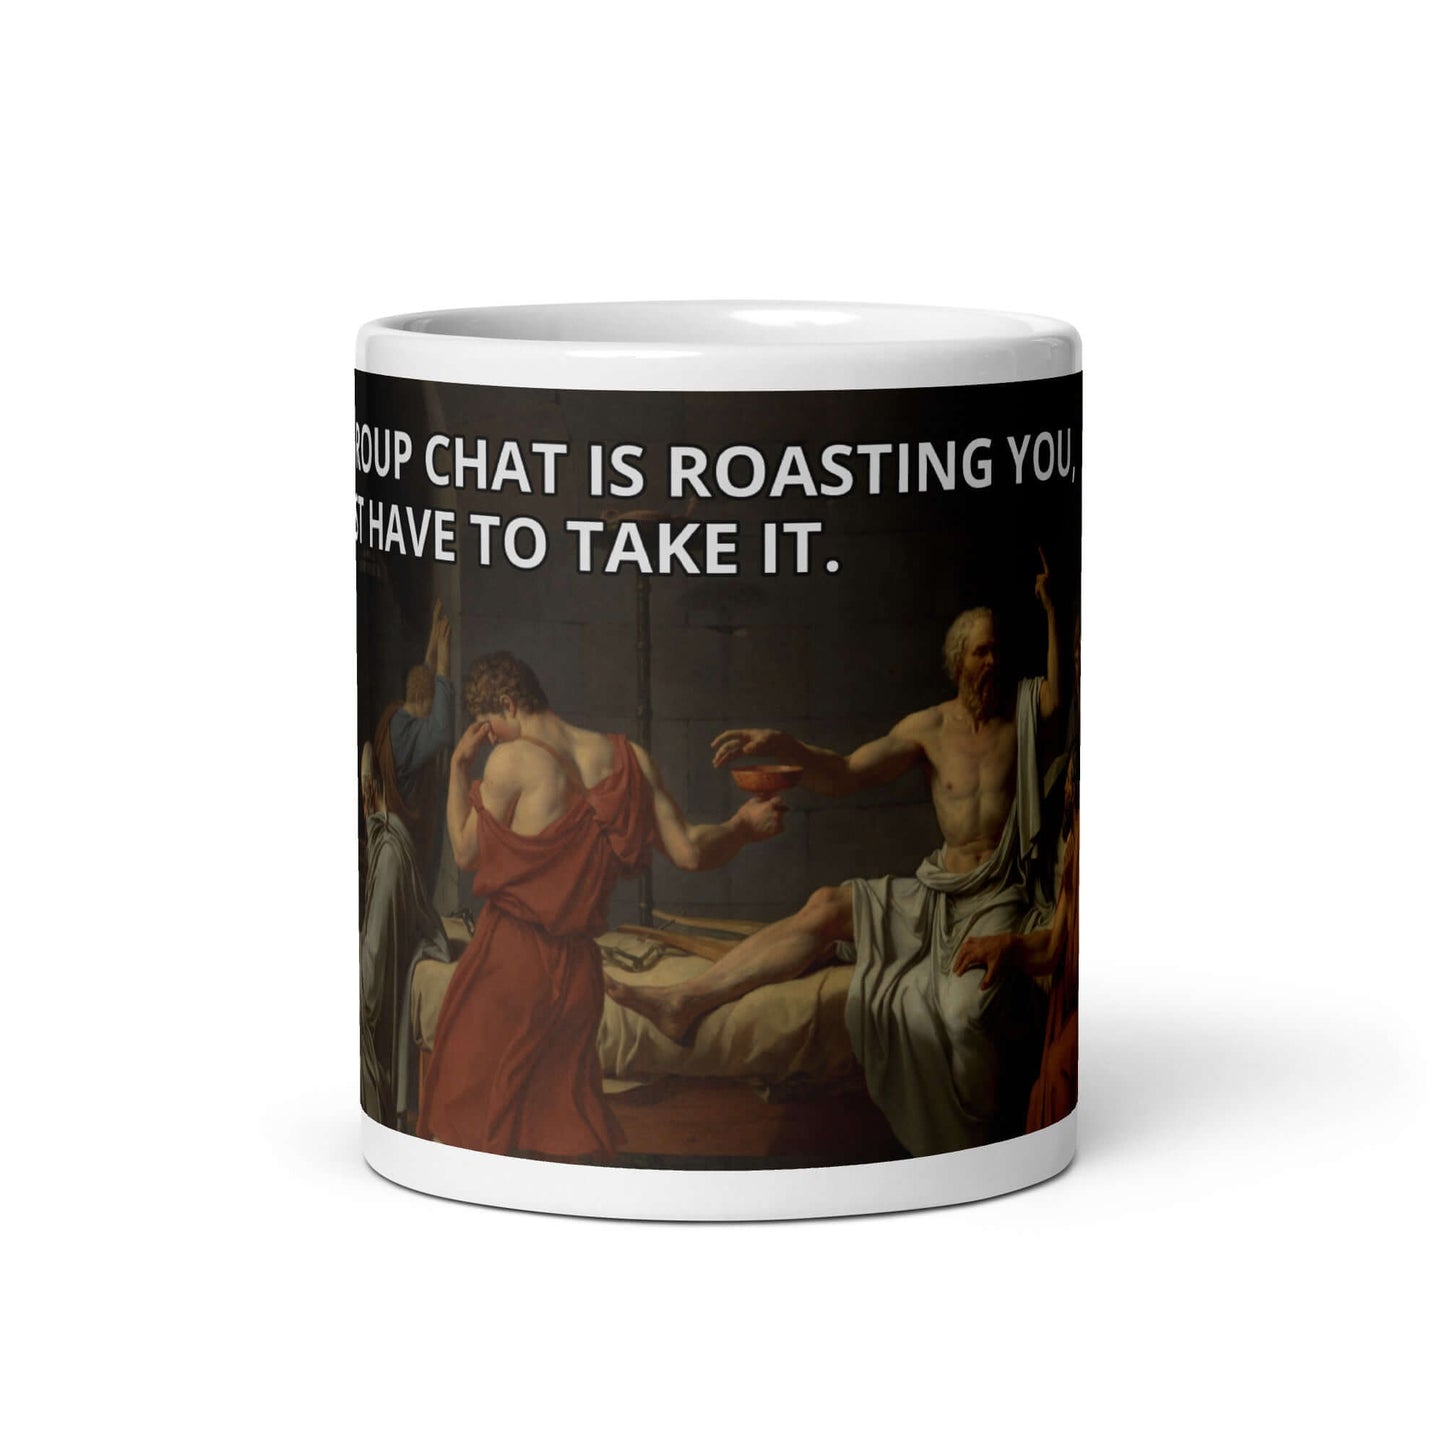 Socrates: When the group chat is roasting you - White glossy mug